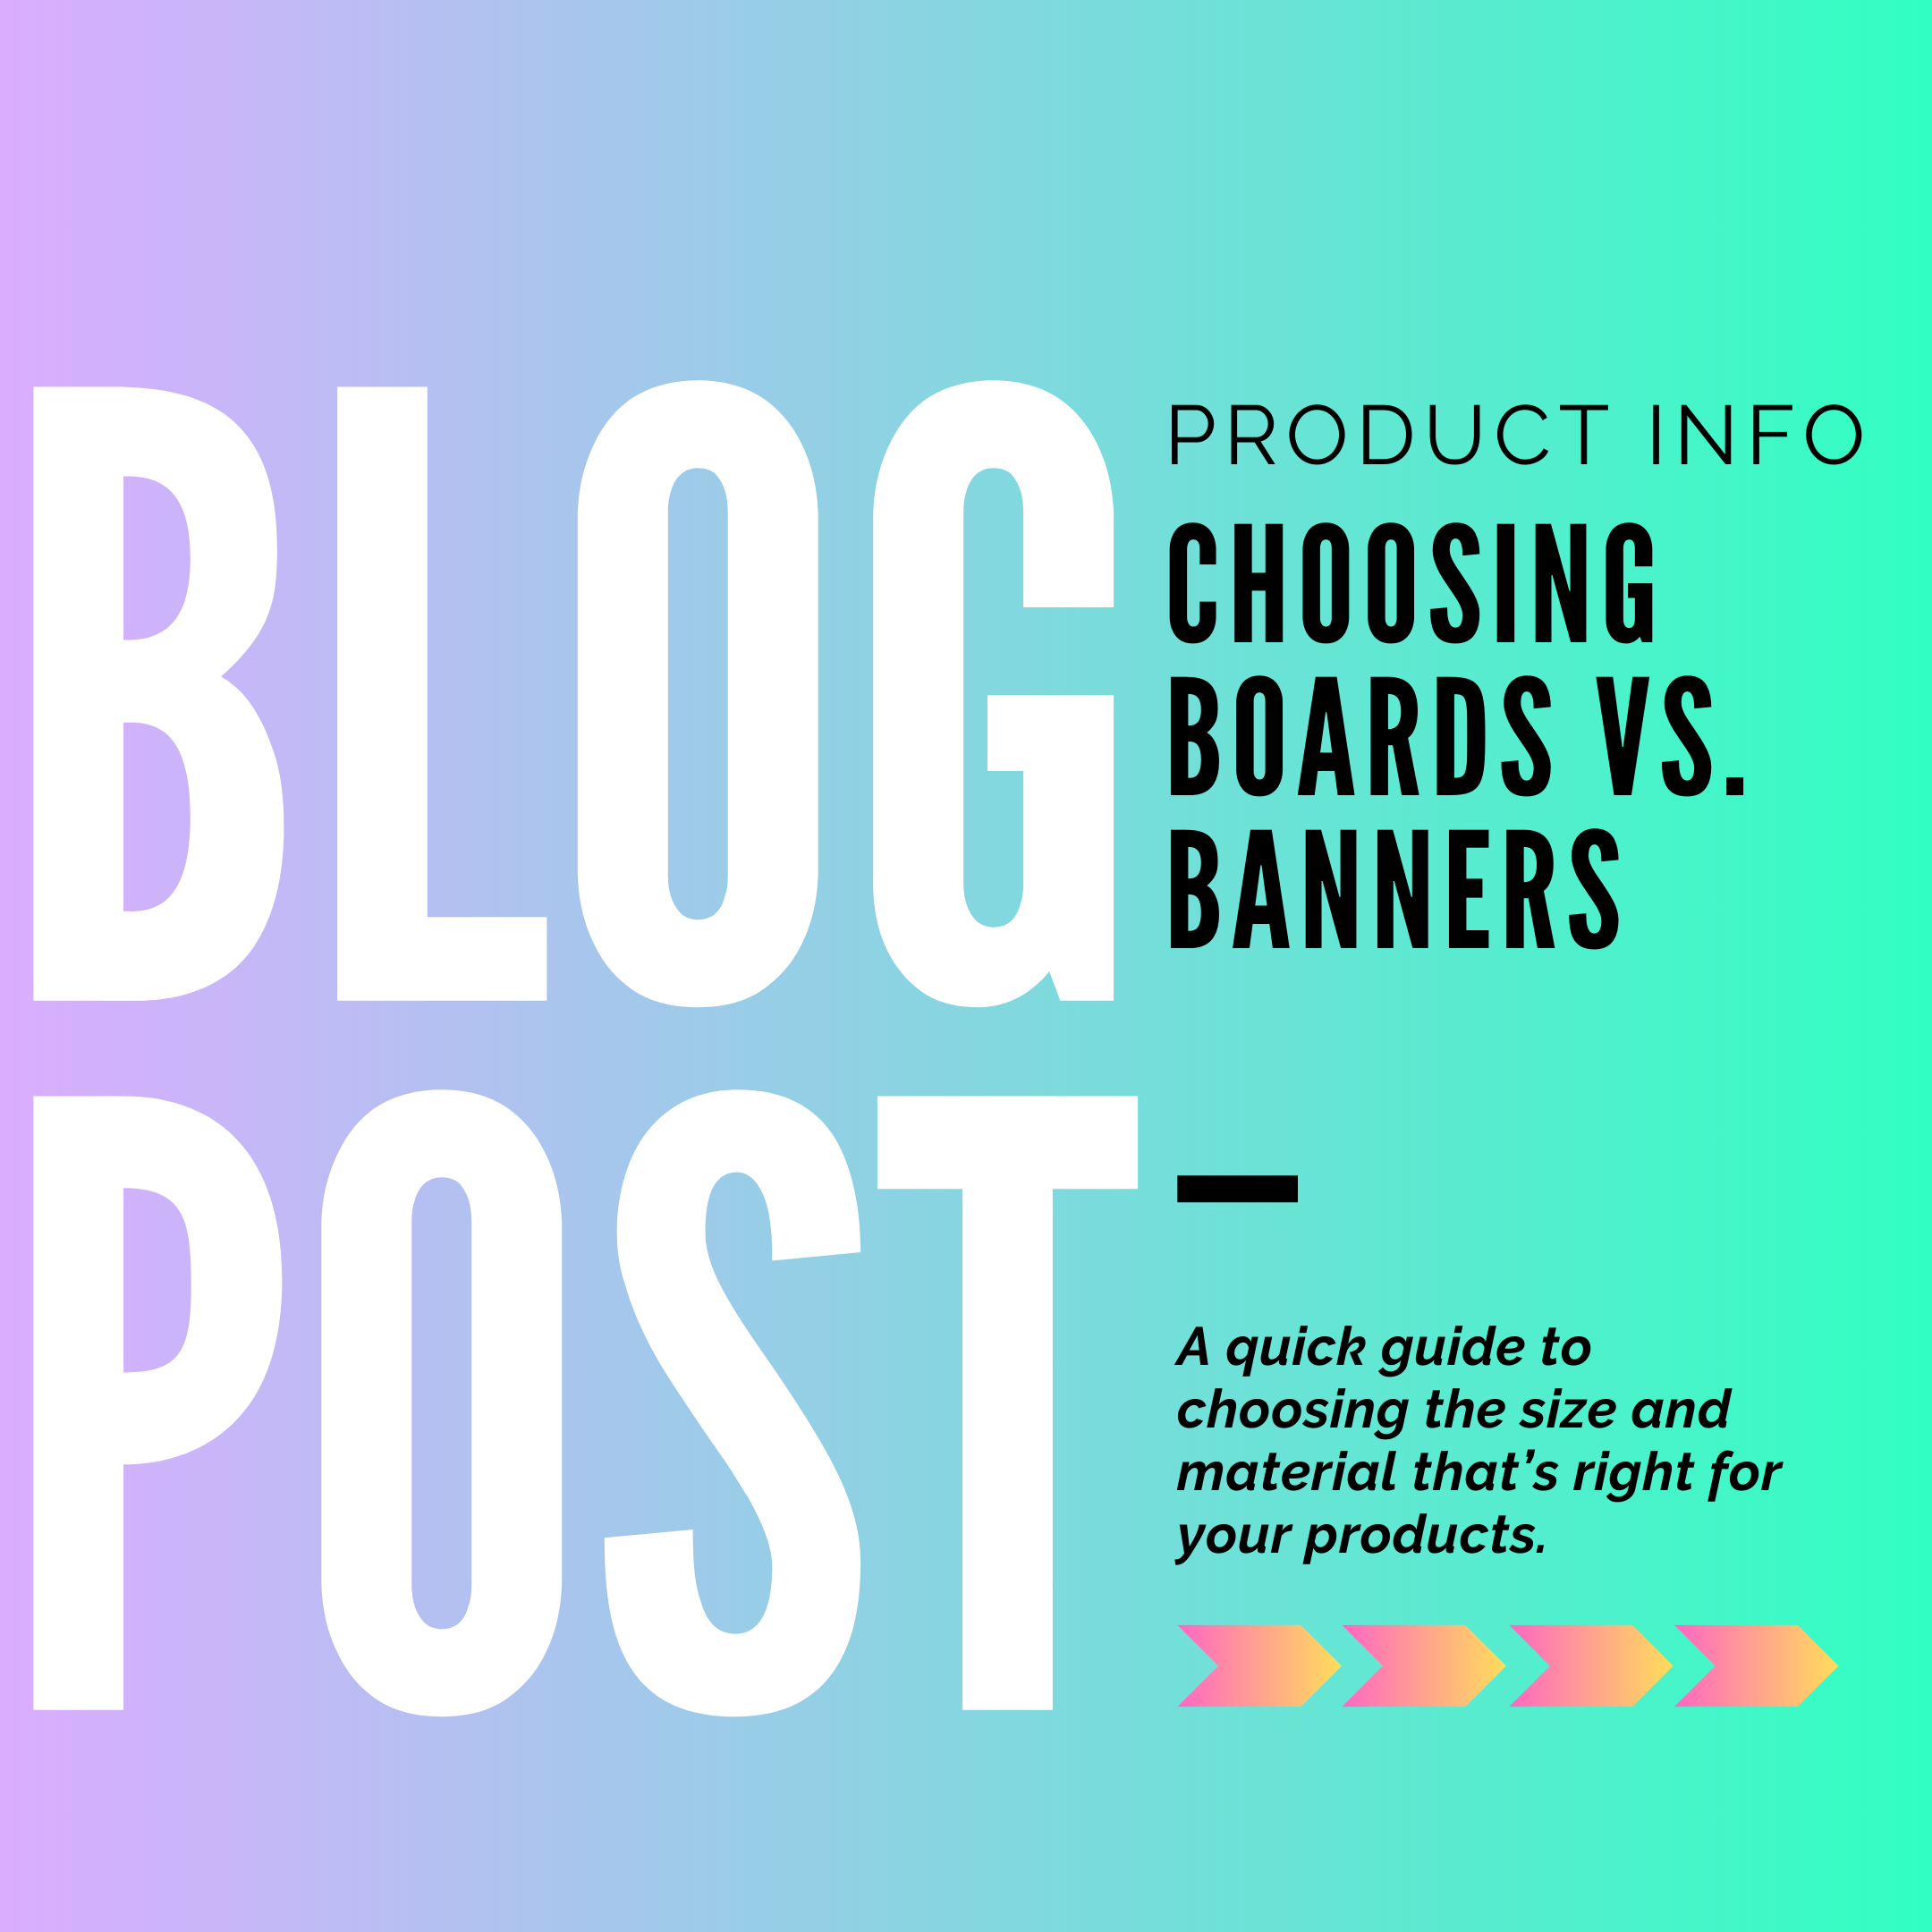 Boards vs Banners